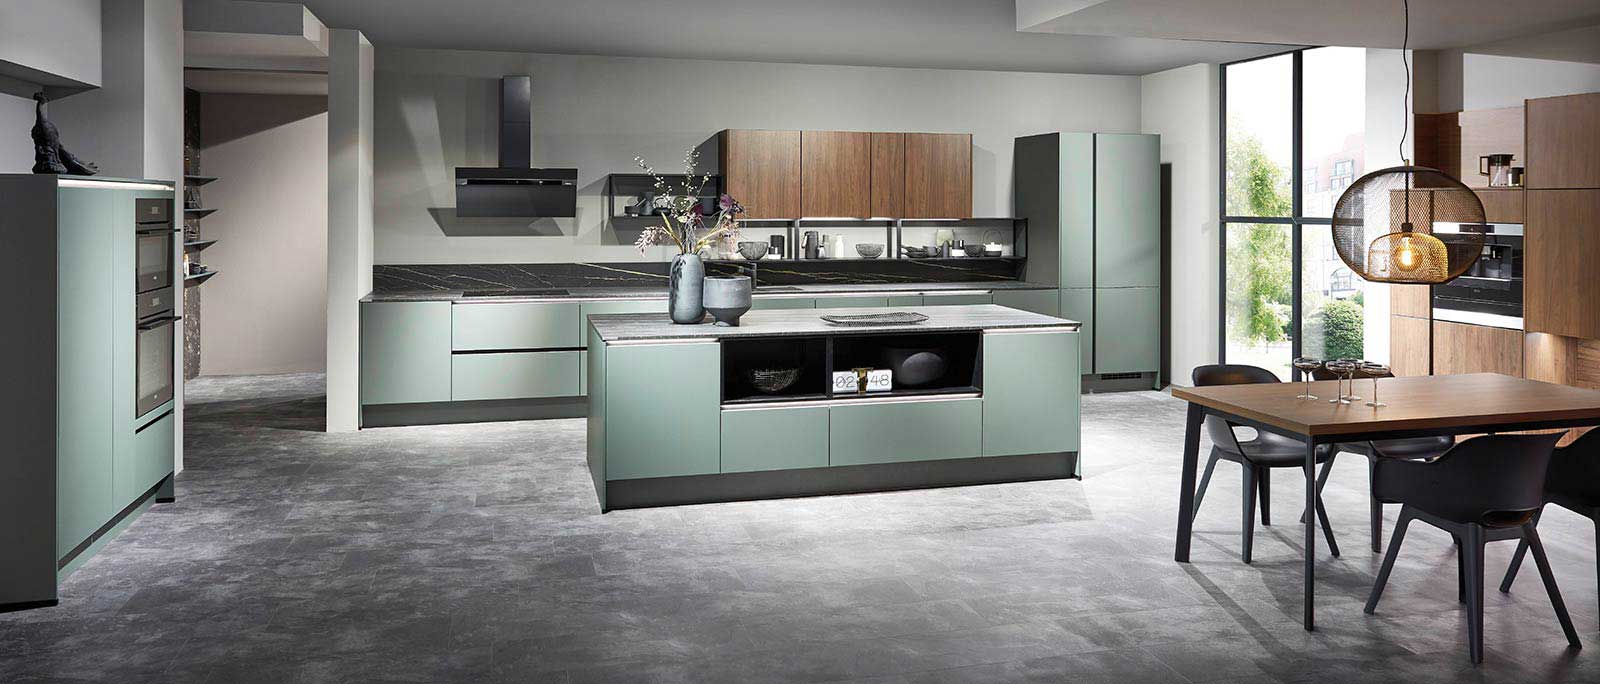 Best Modular Kitchen Layouts that you must explore